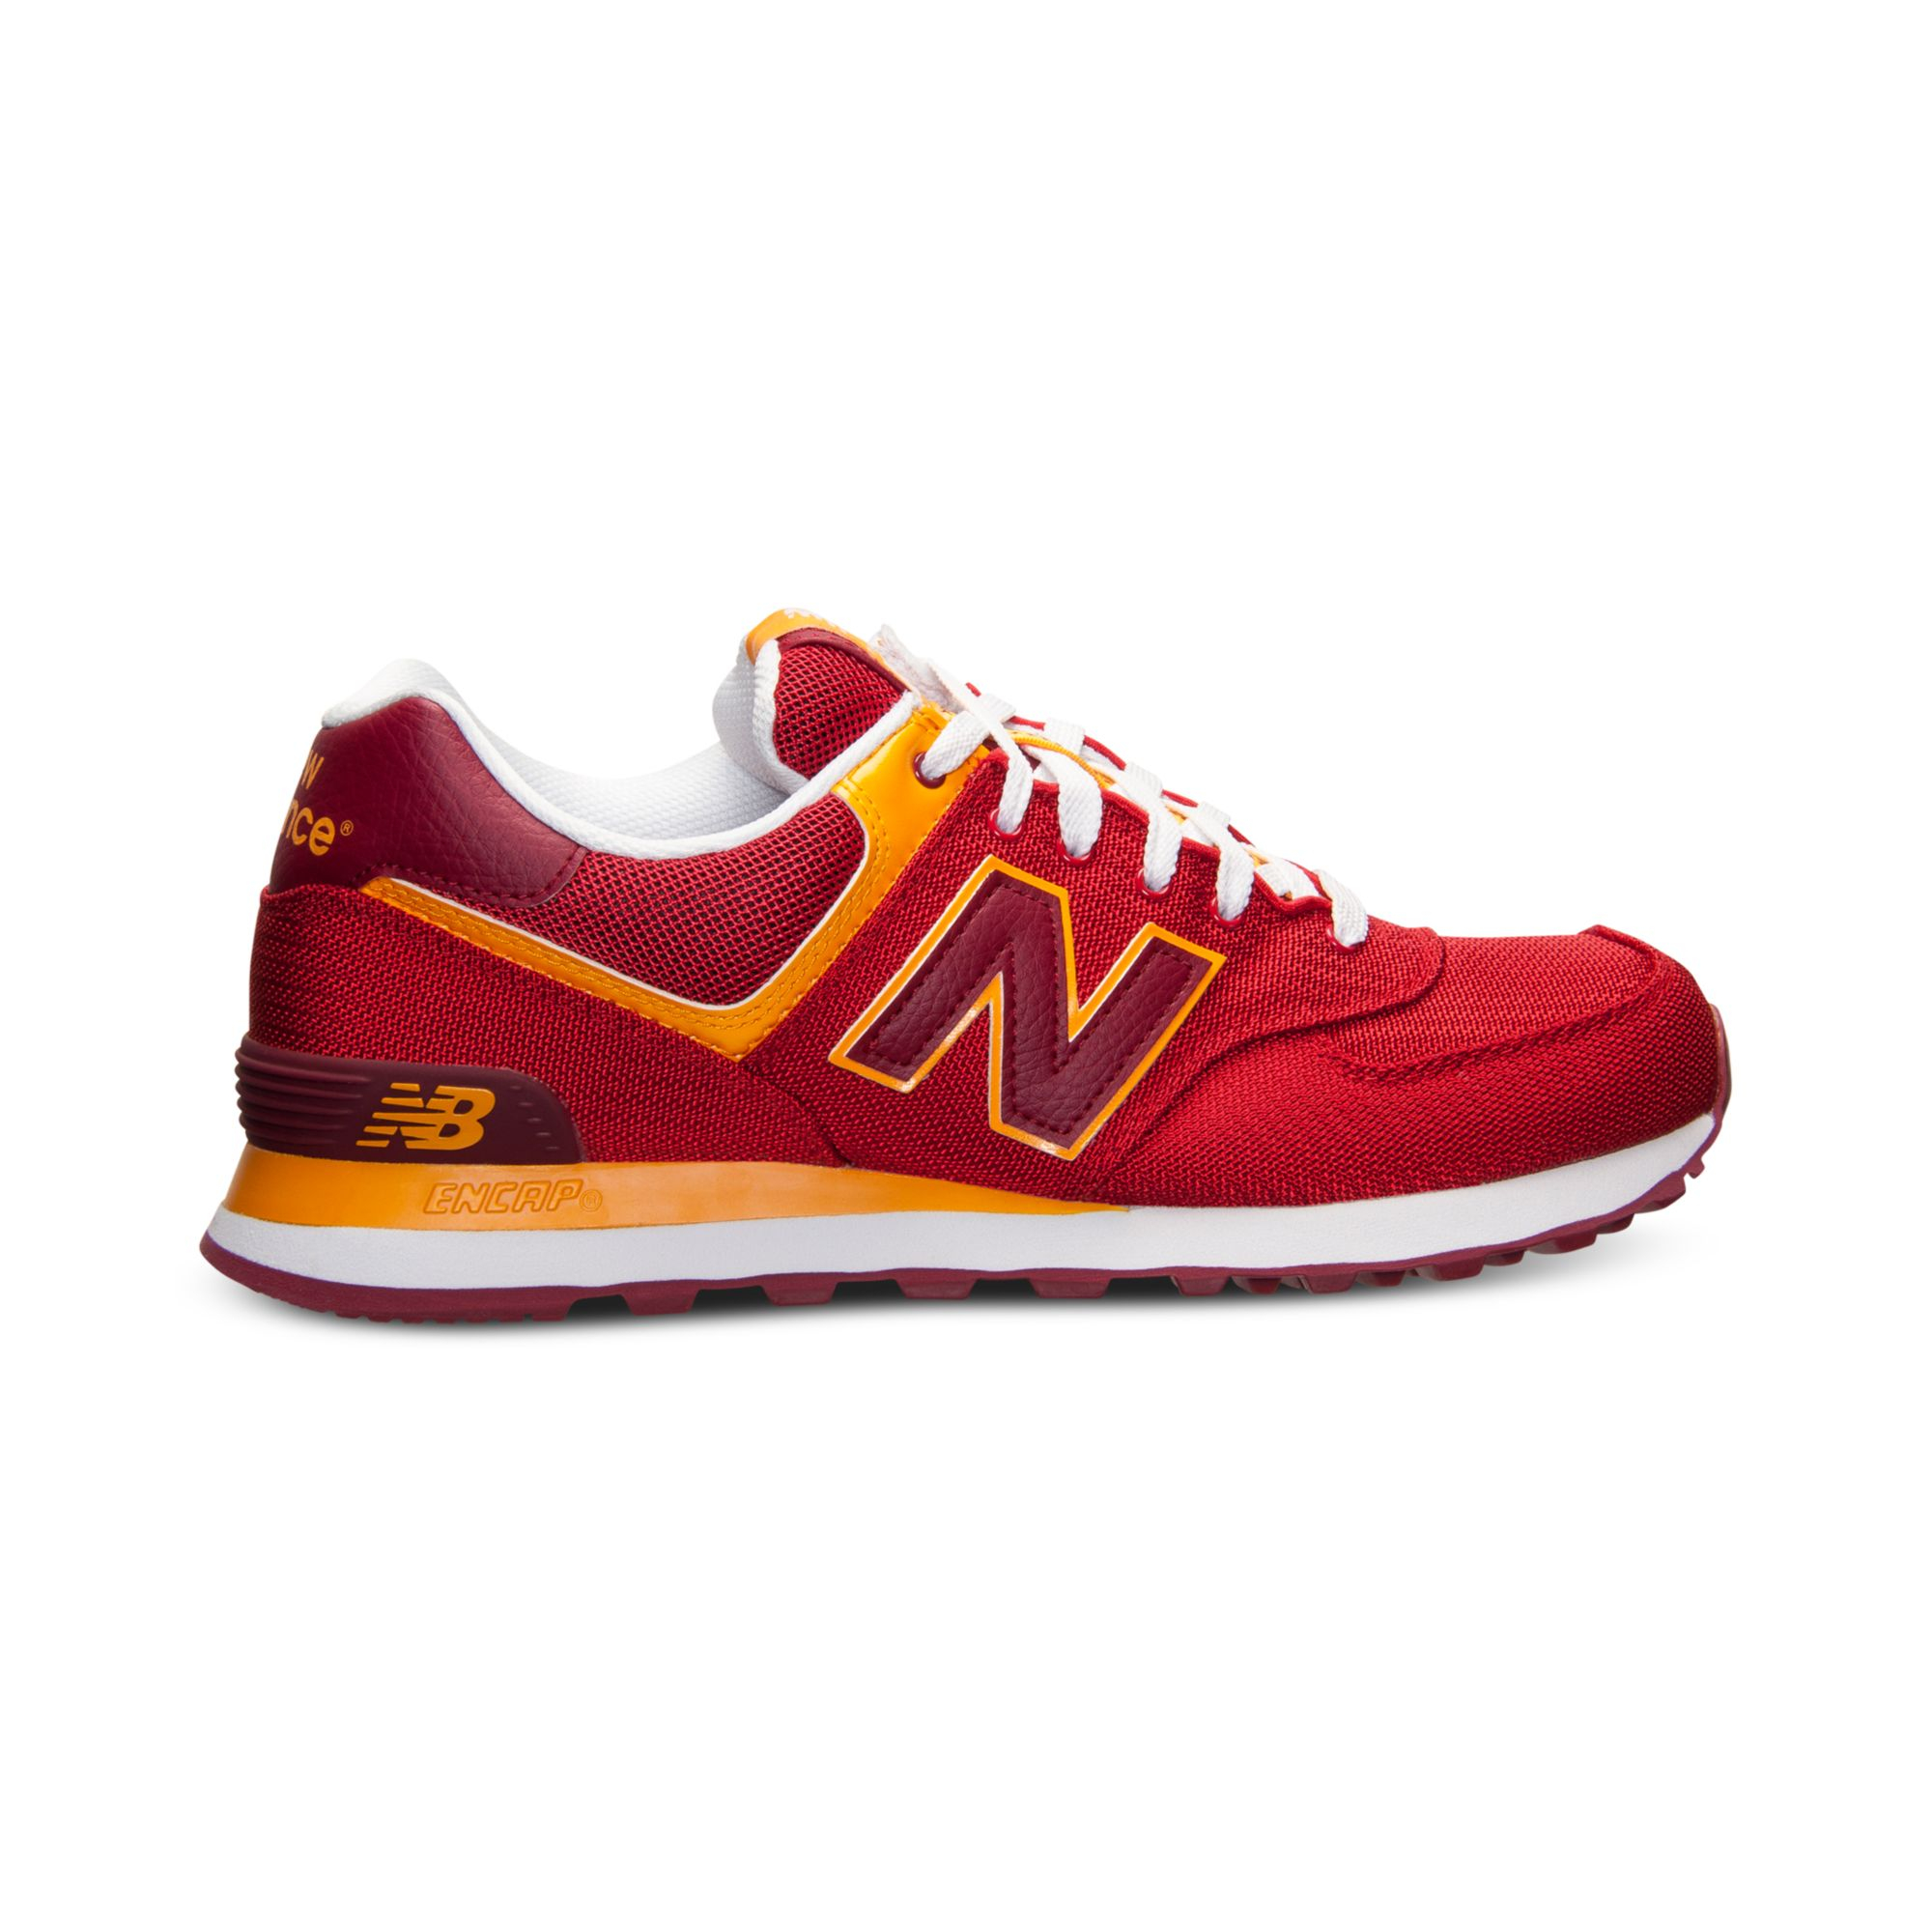 New Balance Mens 574 Passport Casual Sneakers From Finish ...